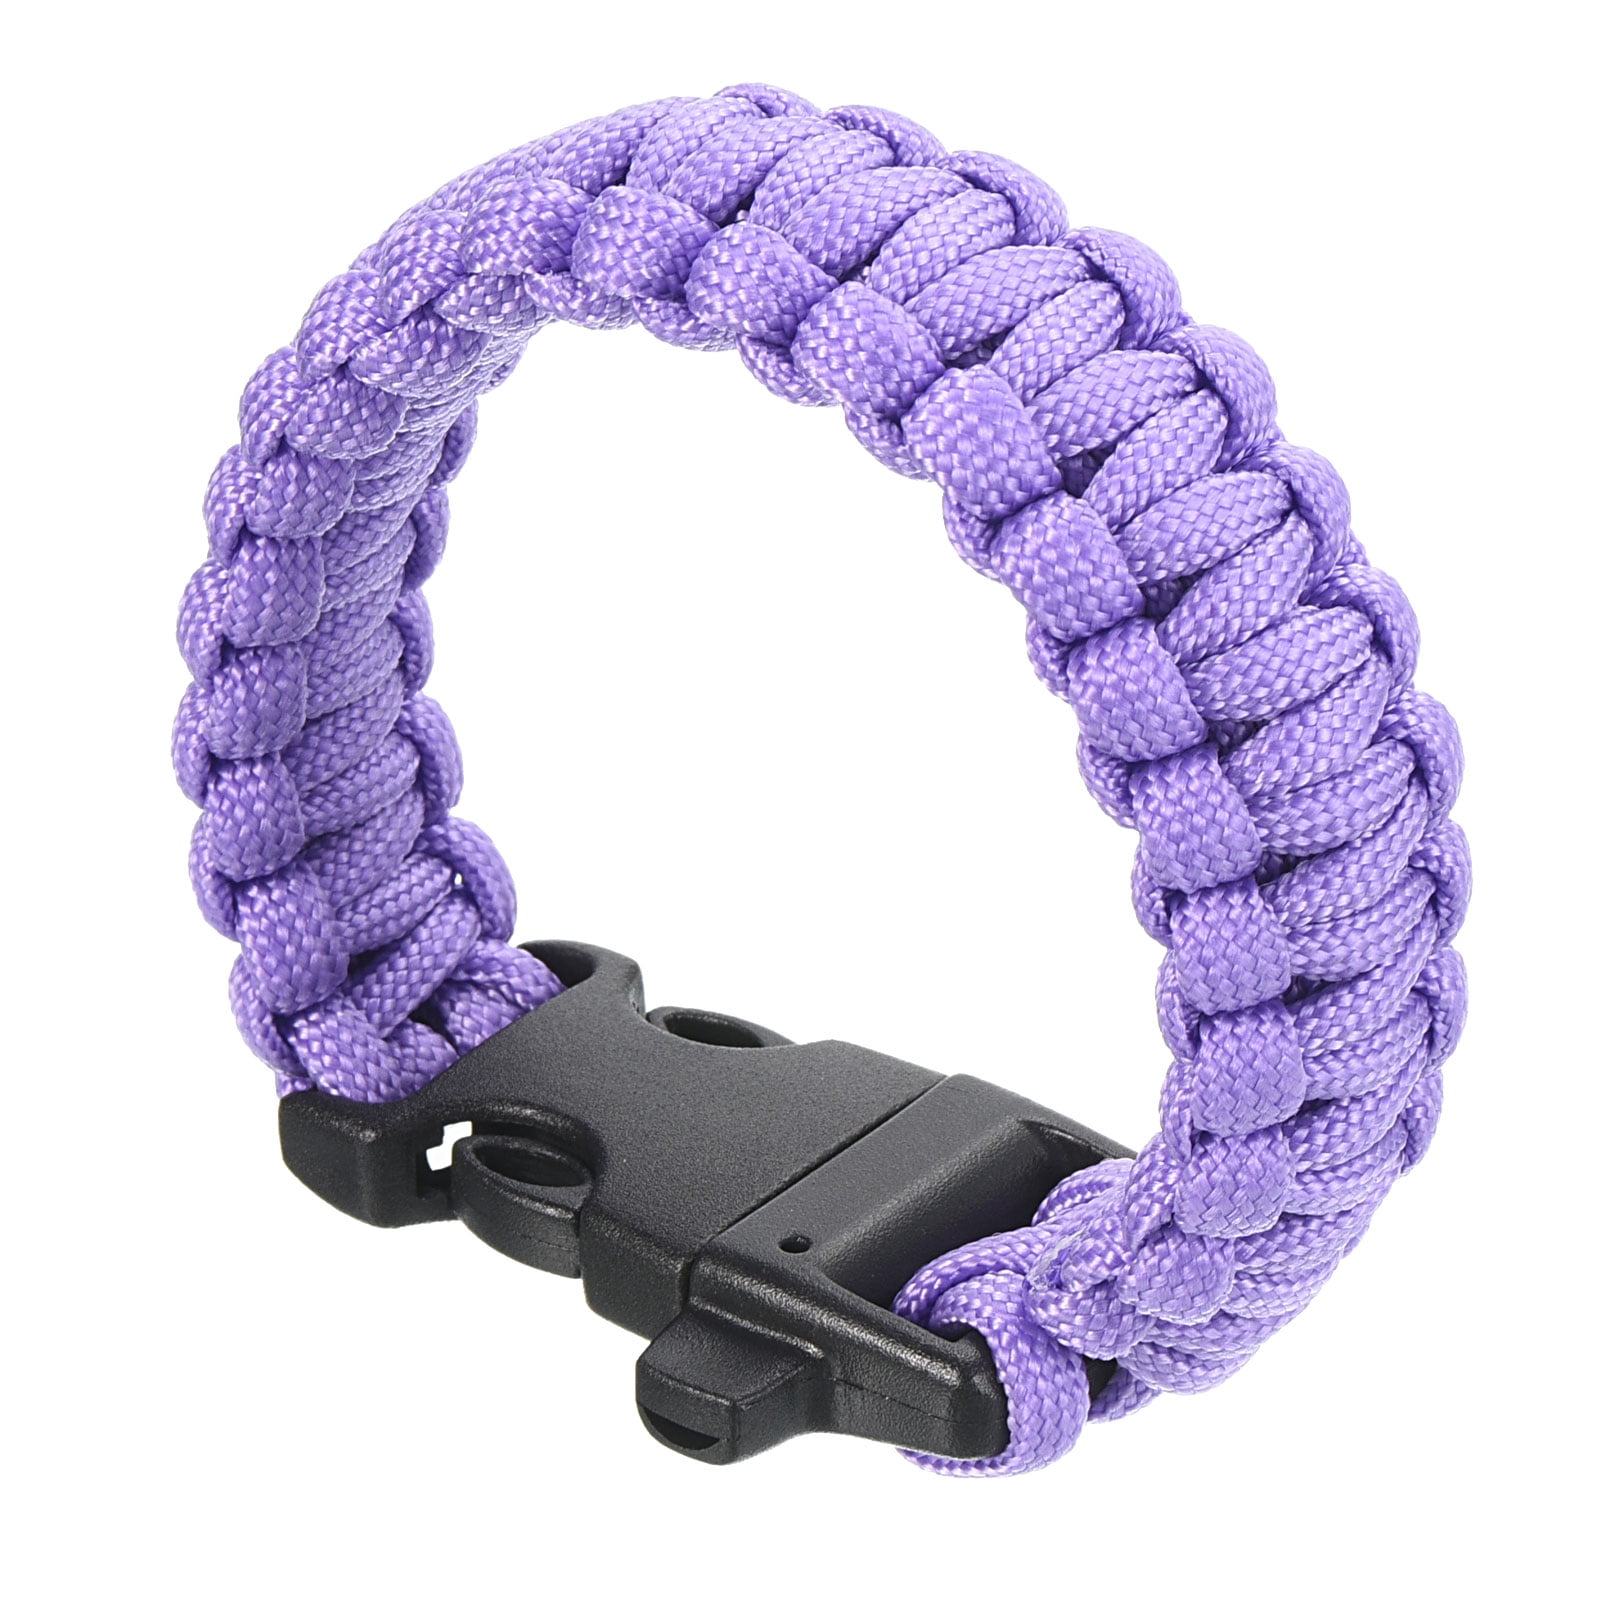 Fish Tail Paracord Survival Bracelets with Metal Clasp, Adjustable Size  Fits 